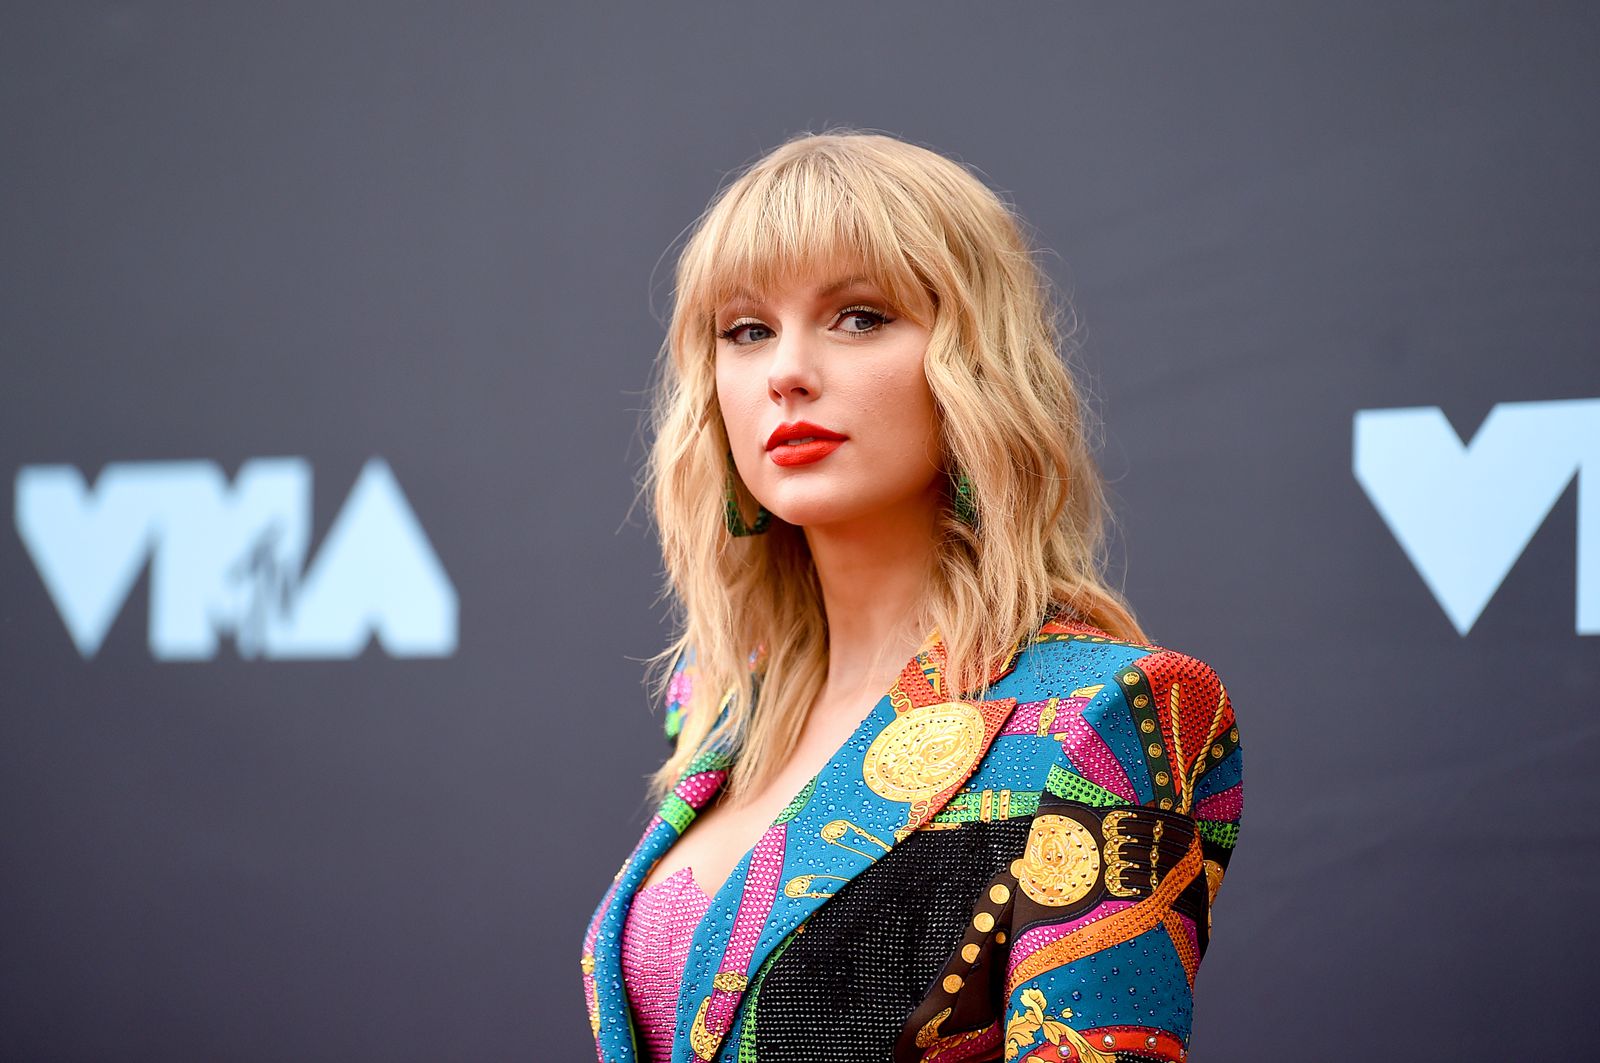 Taylor Swift at the MTV Video Music Awards on August 26, 2019, in Newark, New Jersey | Photo: Jamie McCarthy/Getty Images